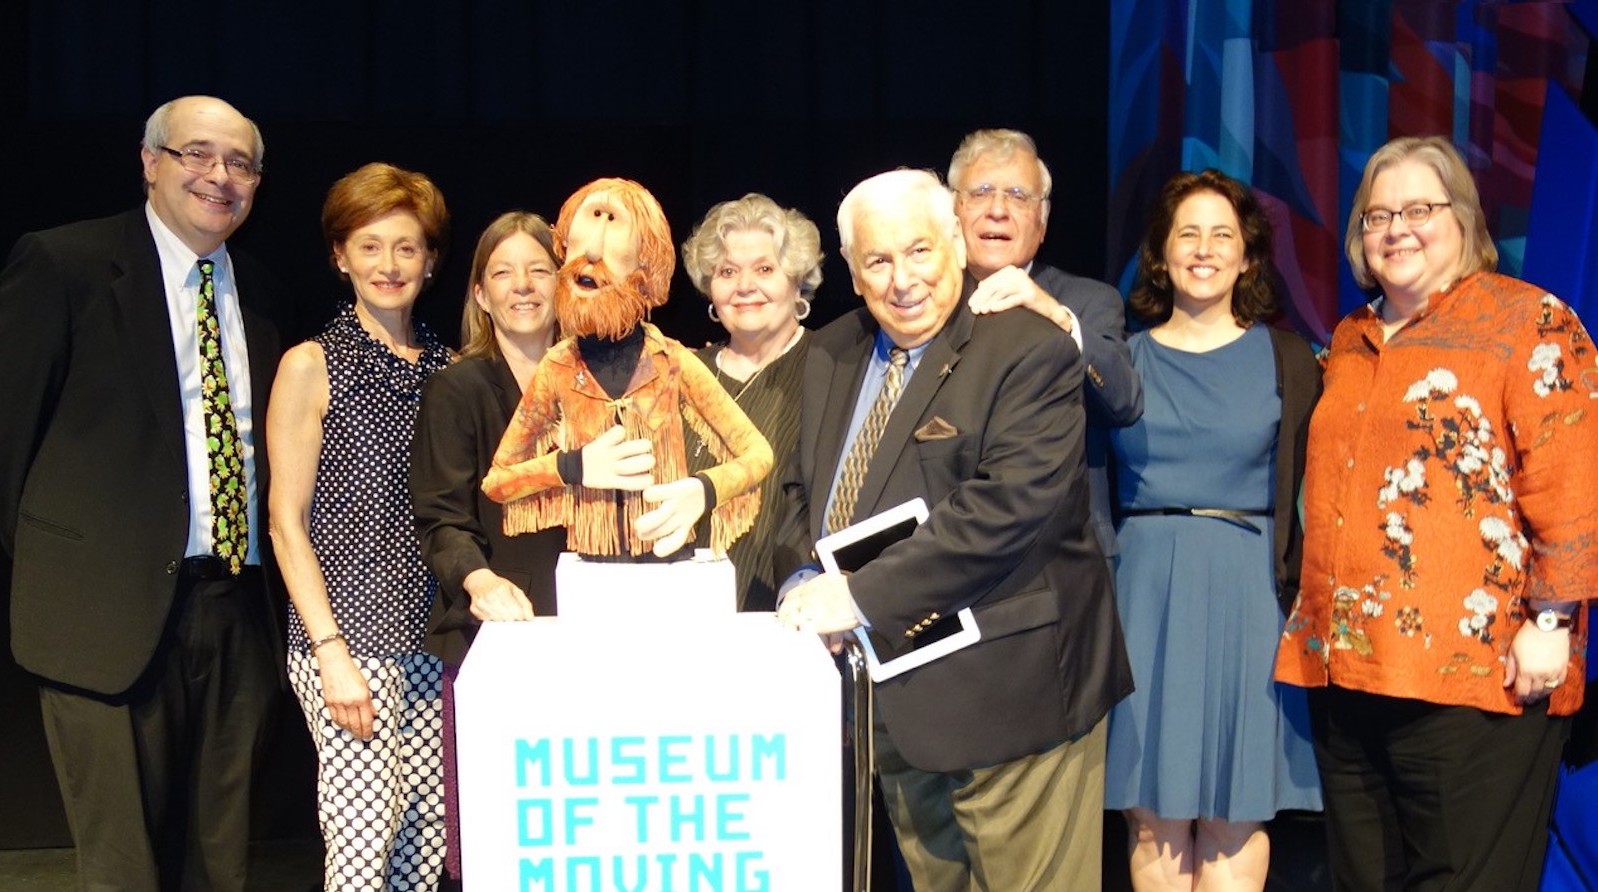 A bearded muppet likeness of Jim Henson stands at a Museum stage podium, surrounded by eight people looking at camera.